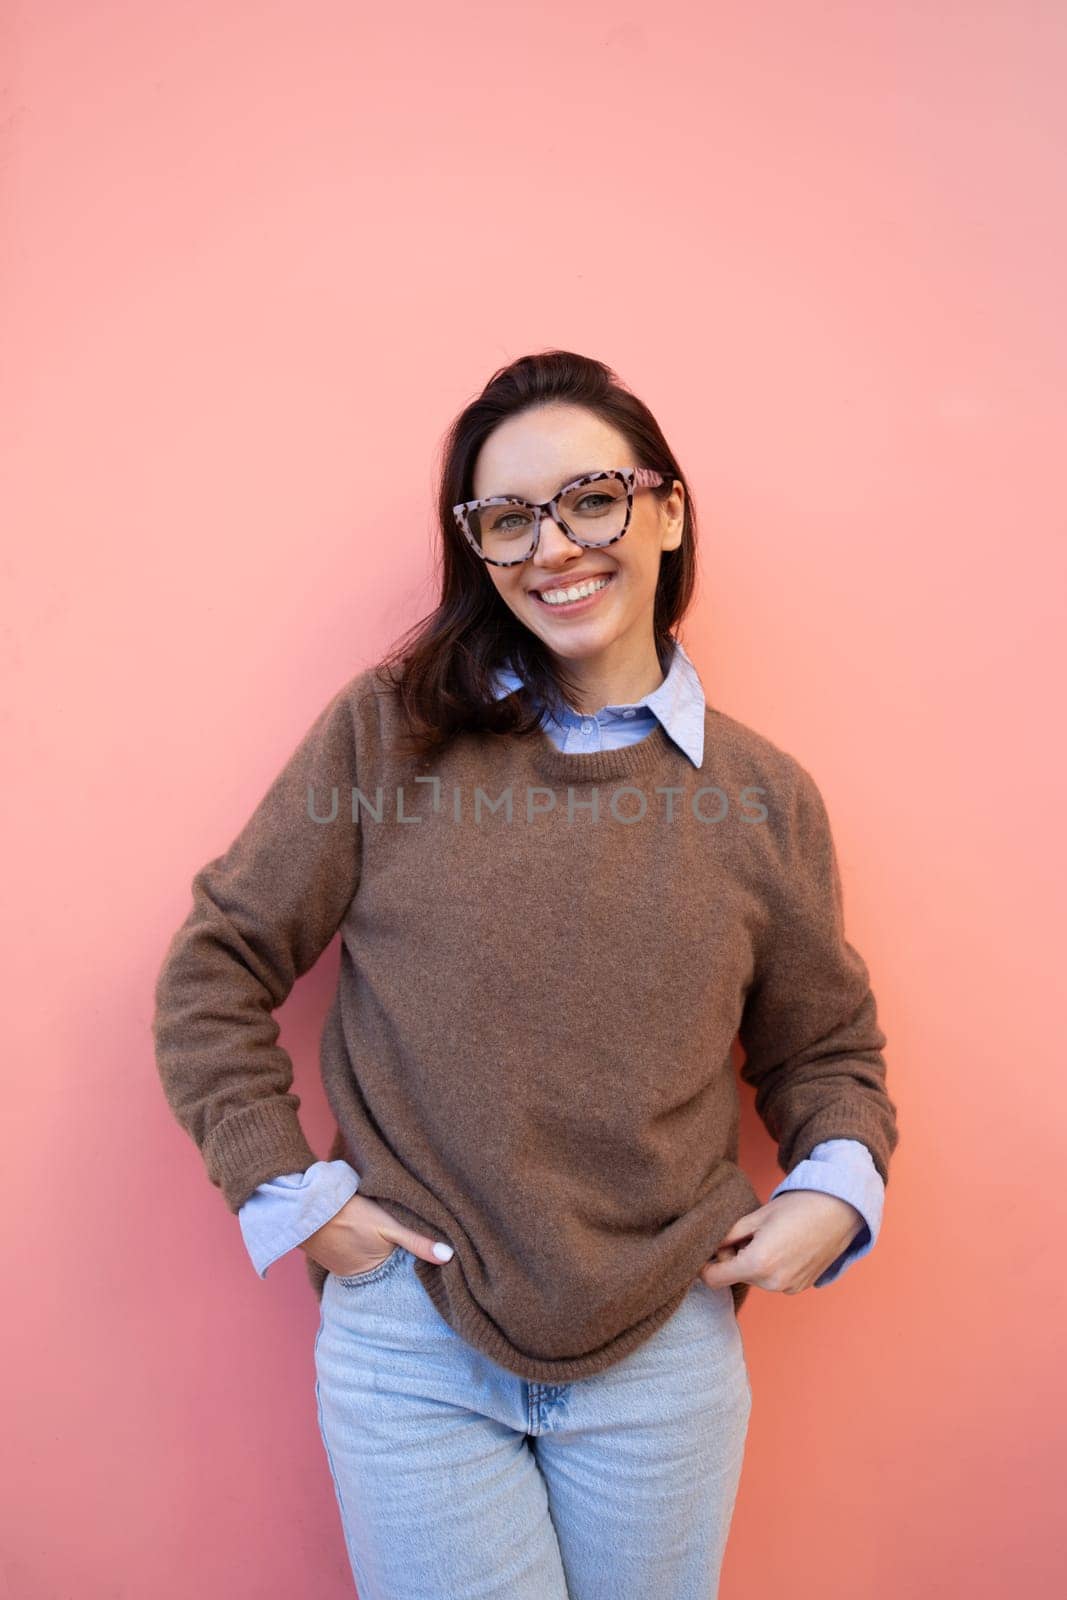 Happy woman in glasses outdoor on yellow and pink color background. Positive people concept. Smiling girl looking at camera, hands in pocket, dressed sweater and jeans